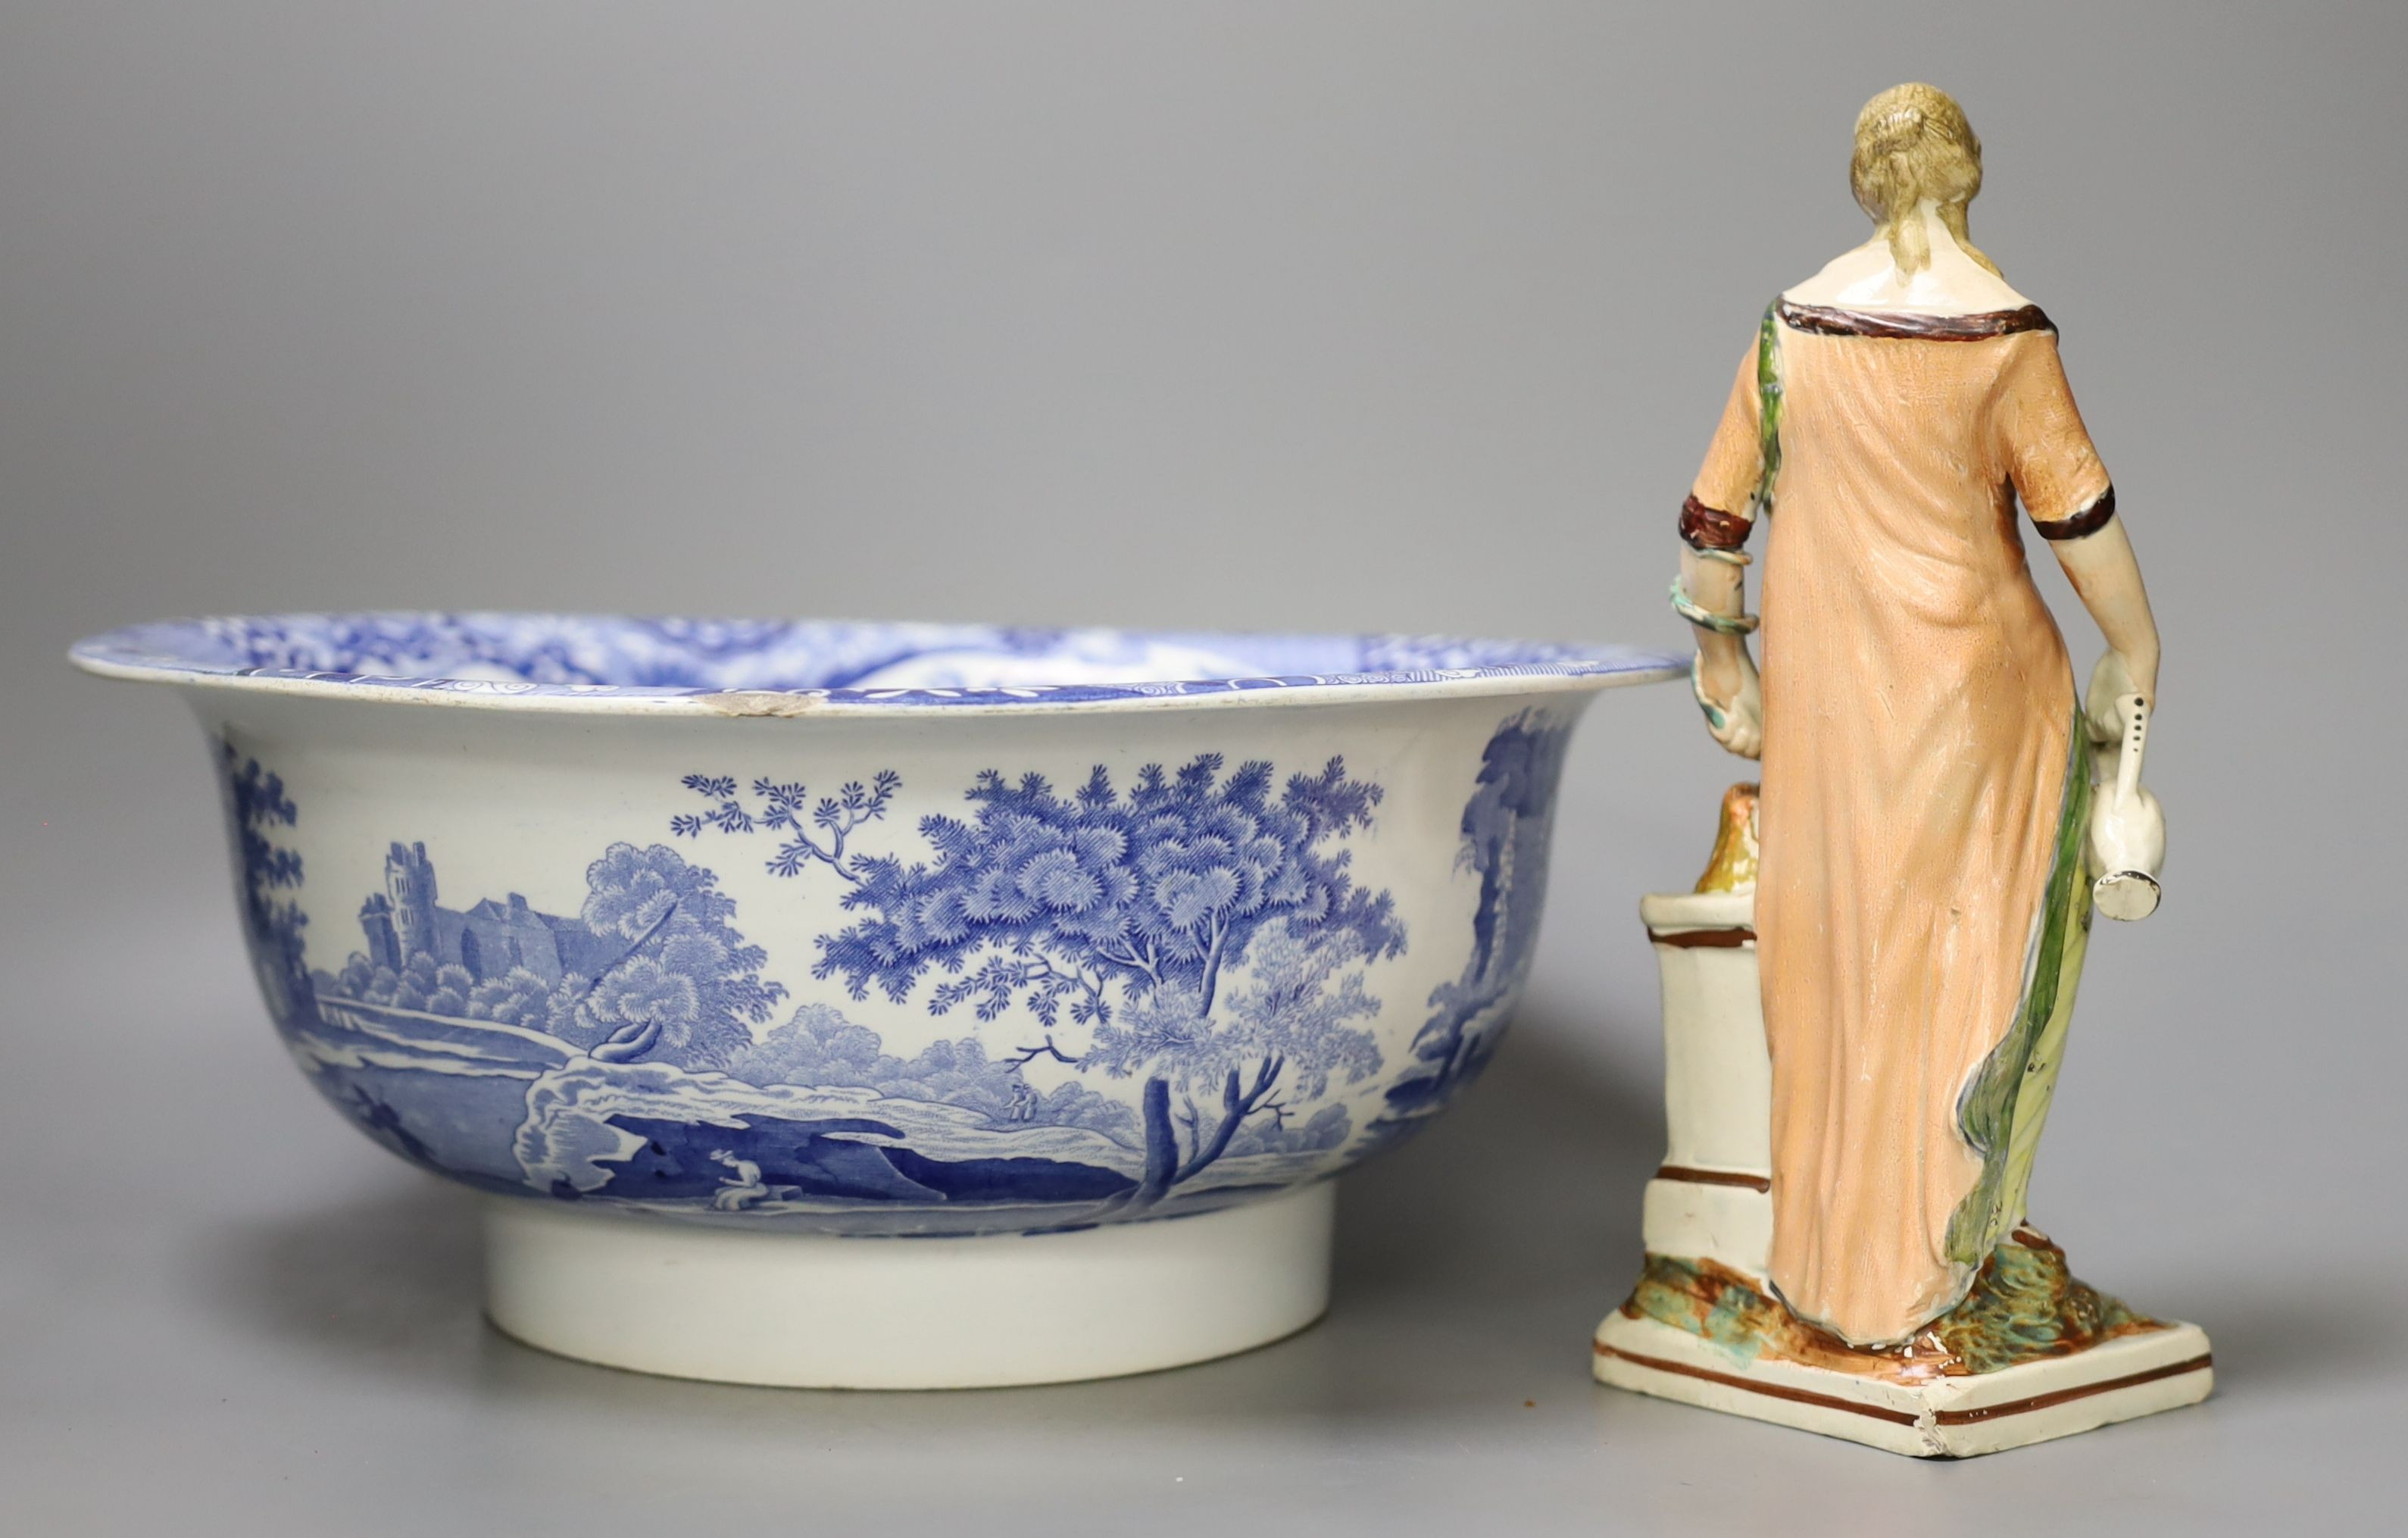 An early 19th century pearlware figure of a maiden, 24cm tall, and a Spode Italian bowl